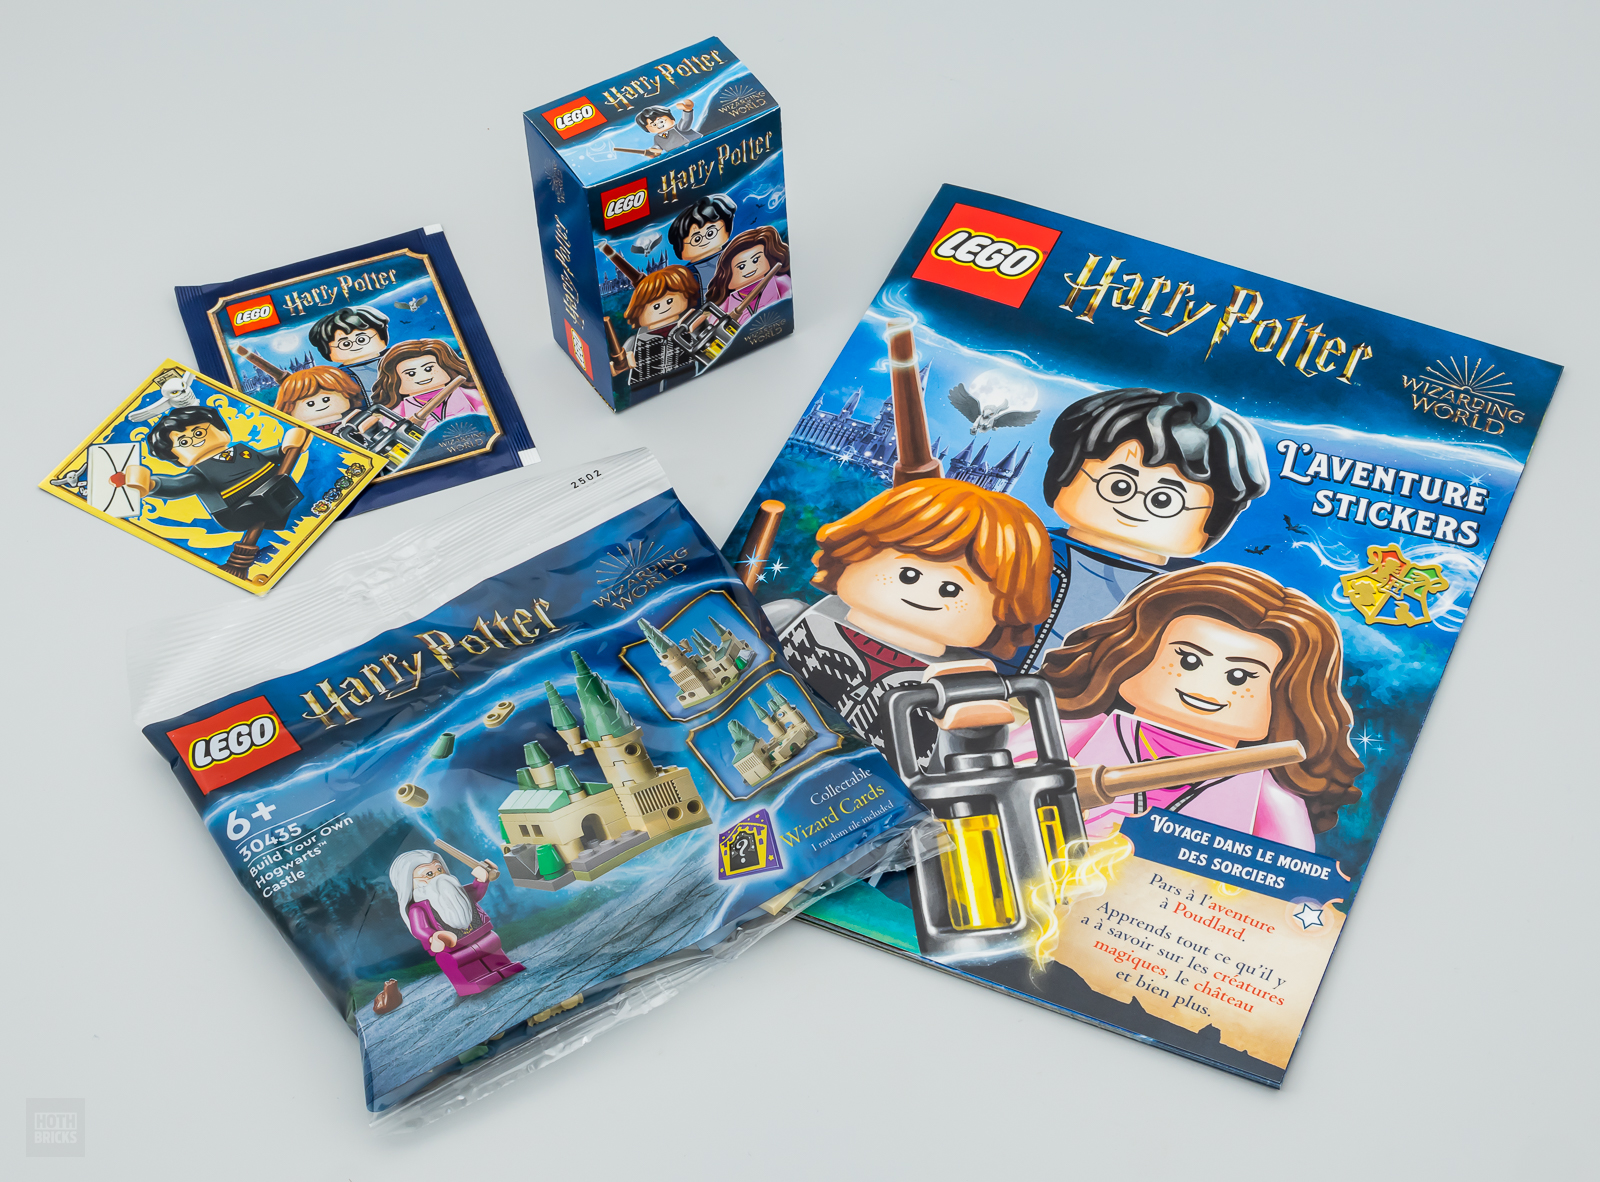 ▻ On newsstands: LEGO Harry Potter The Adventure Stickers - HOTH